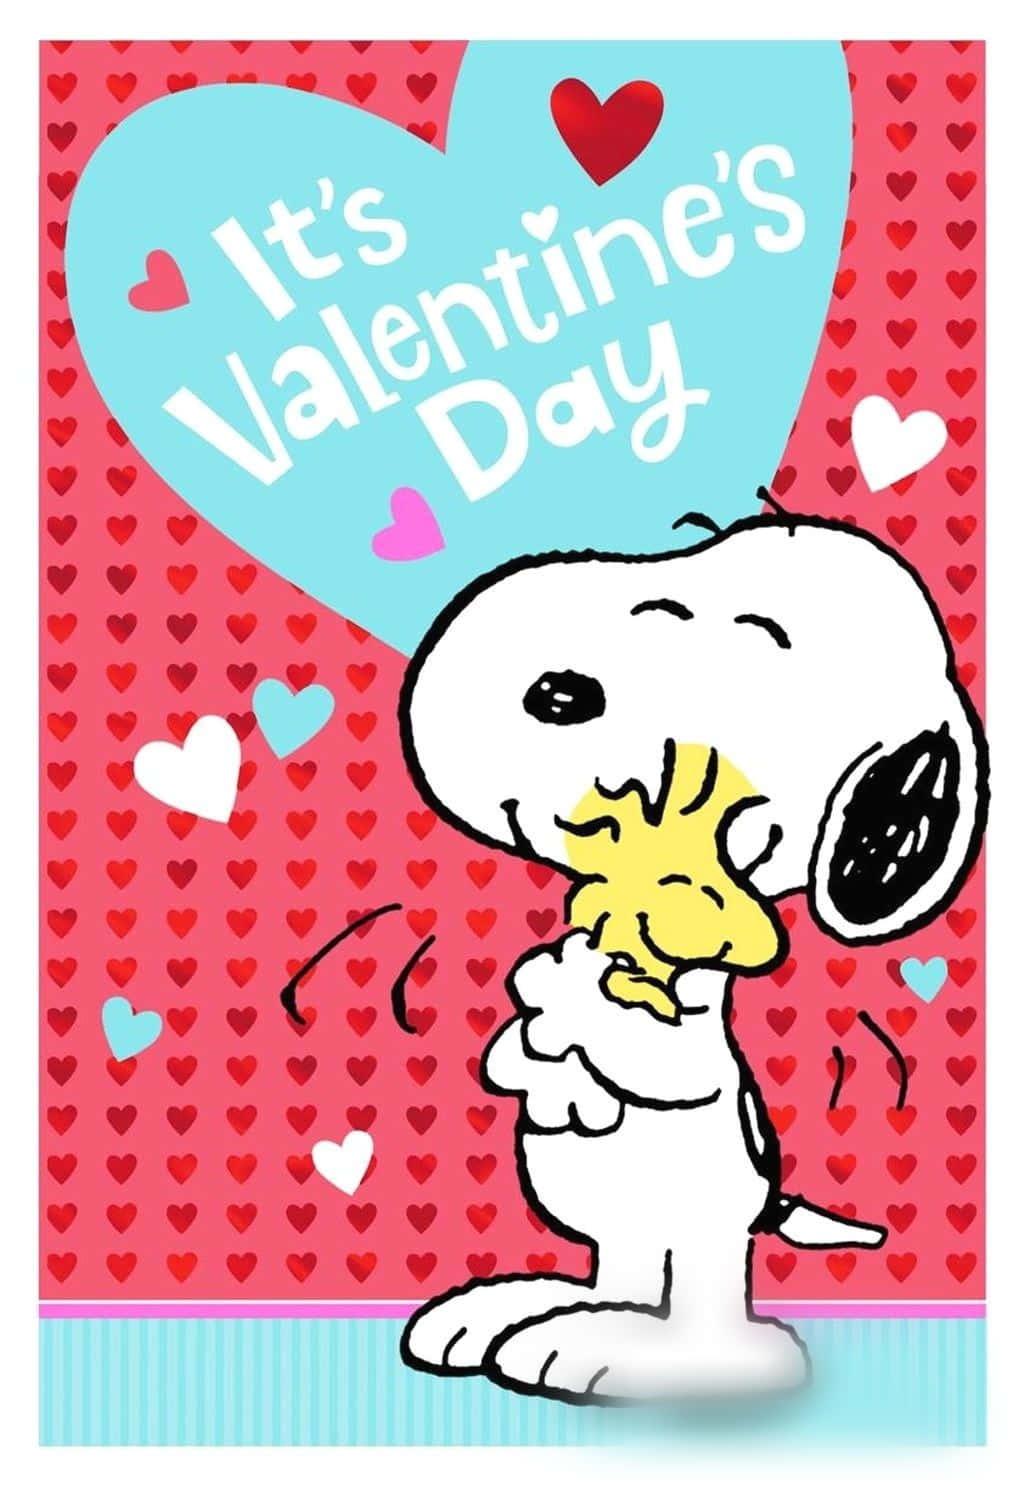 Snoopy And His Dog Are Holding A Heart Shaped Valentine's Day Card Wallpaper